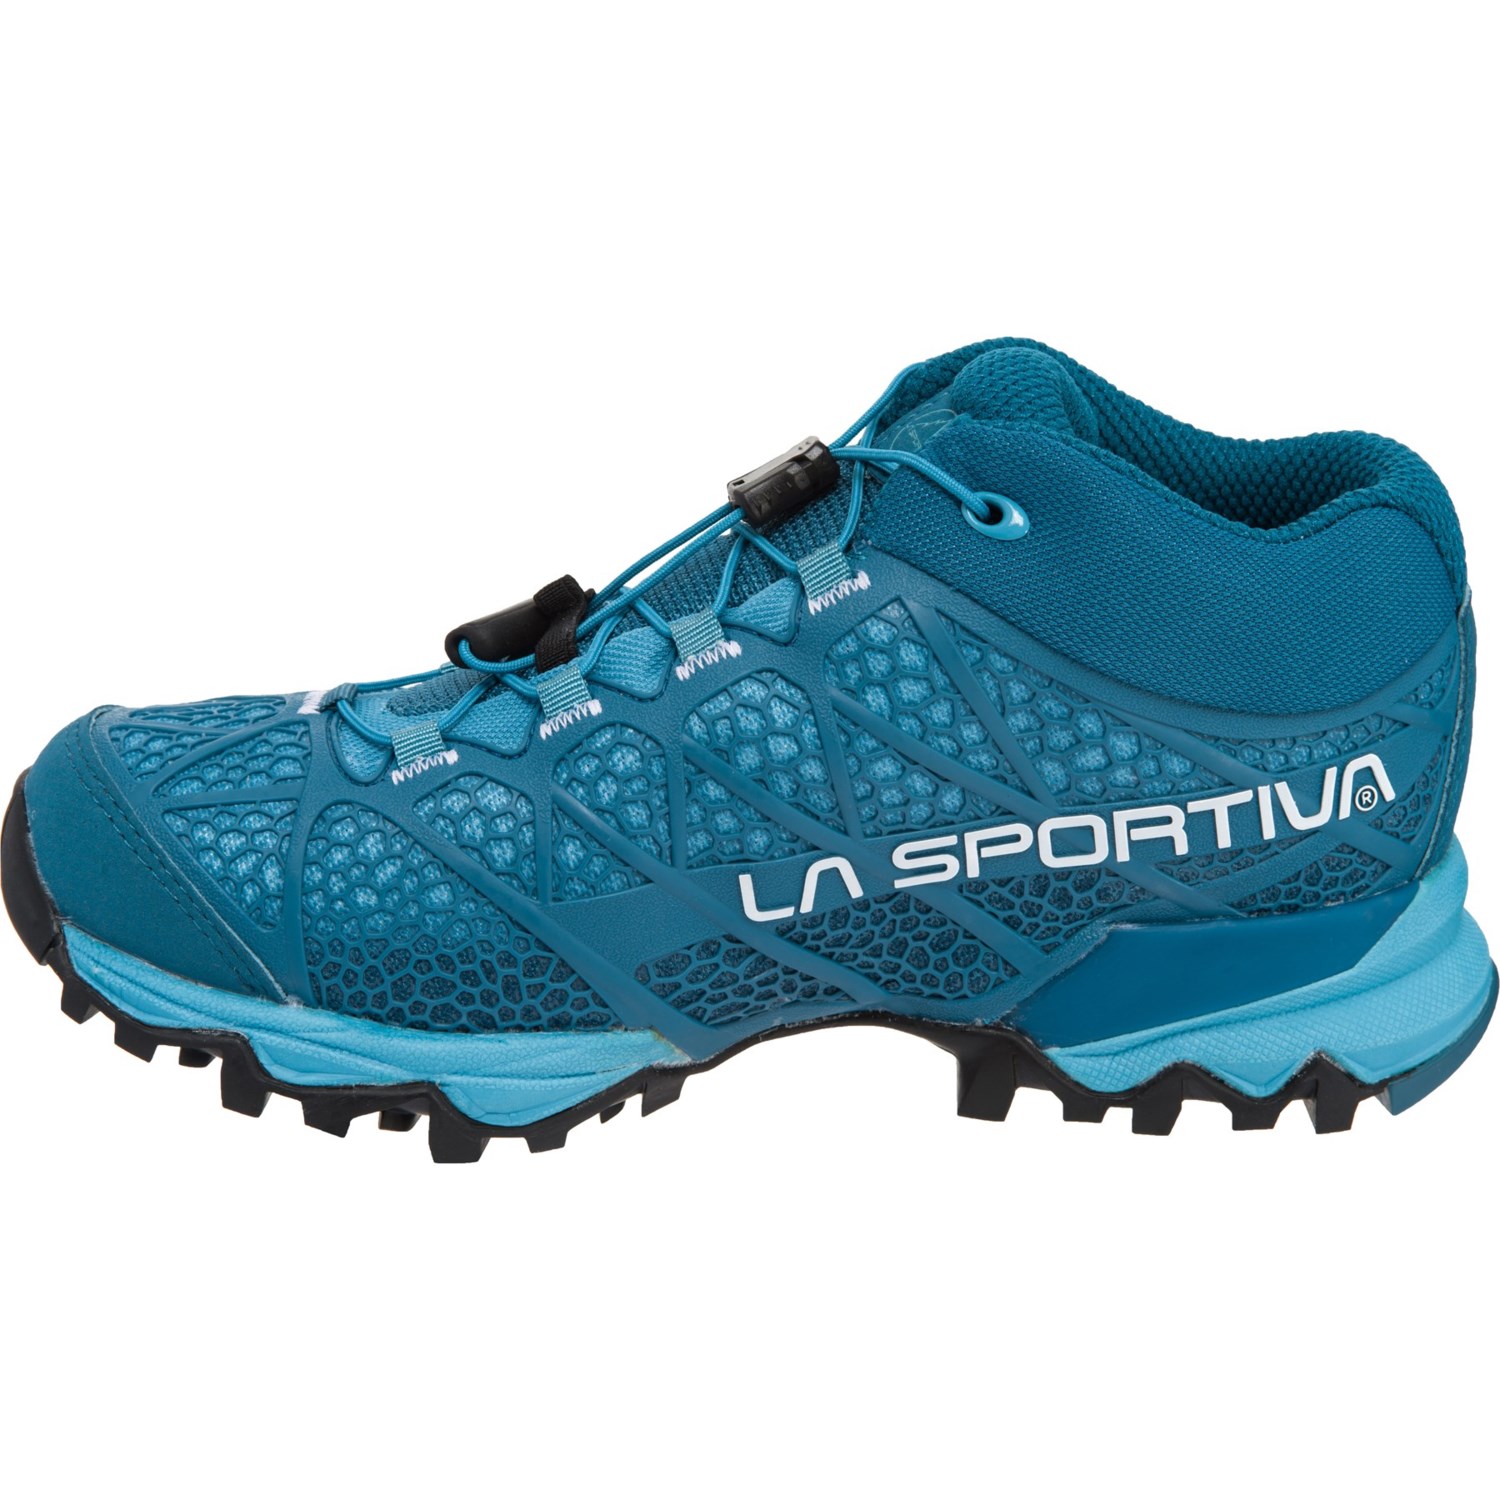 la sportiva synthesis mid gtx light trail shoes